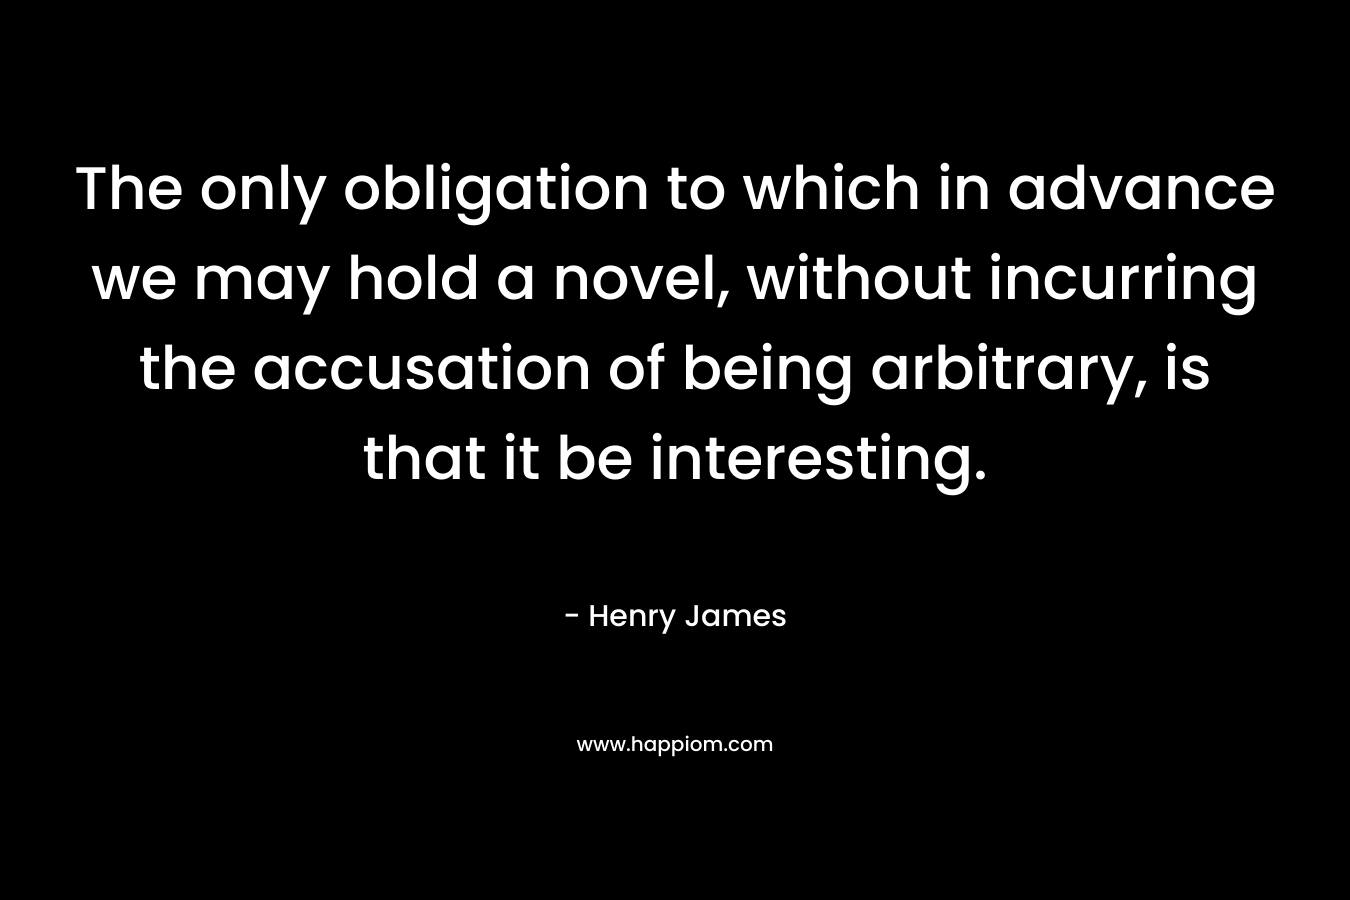 The only obligation to which in advance we may hold a novel, without incurring the accusation of being arbitrary, is that it be interesting.